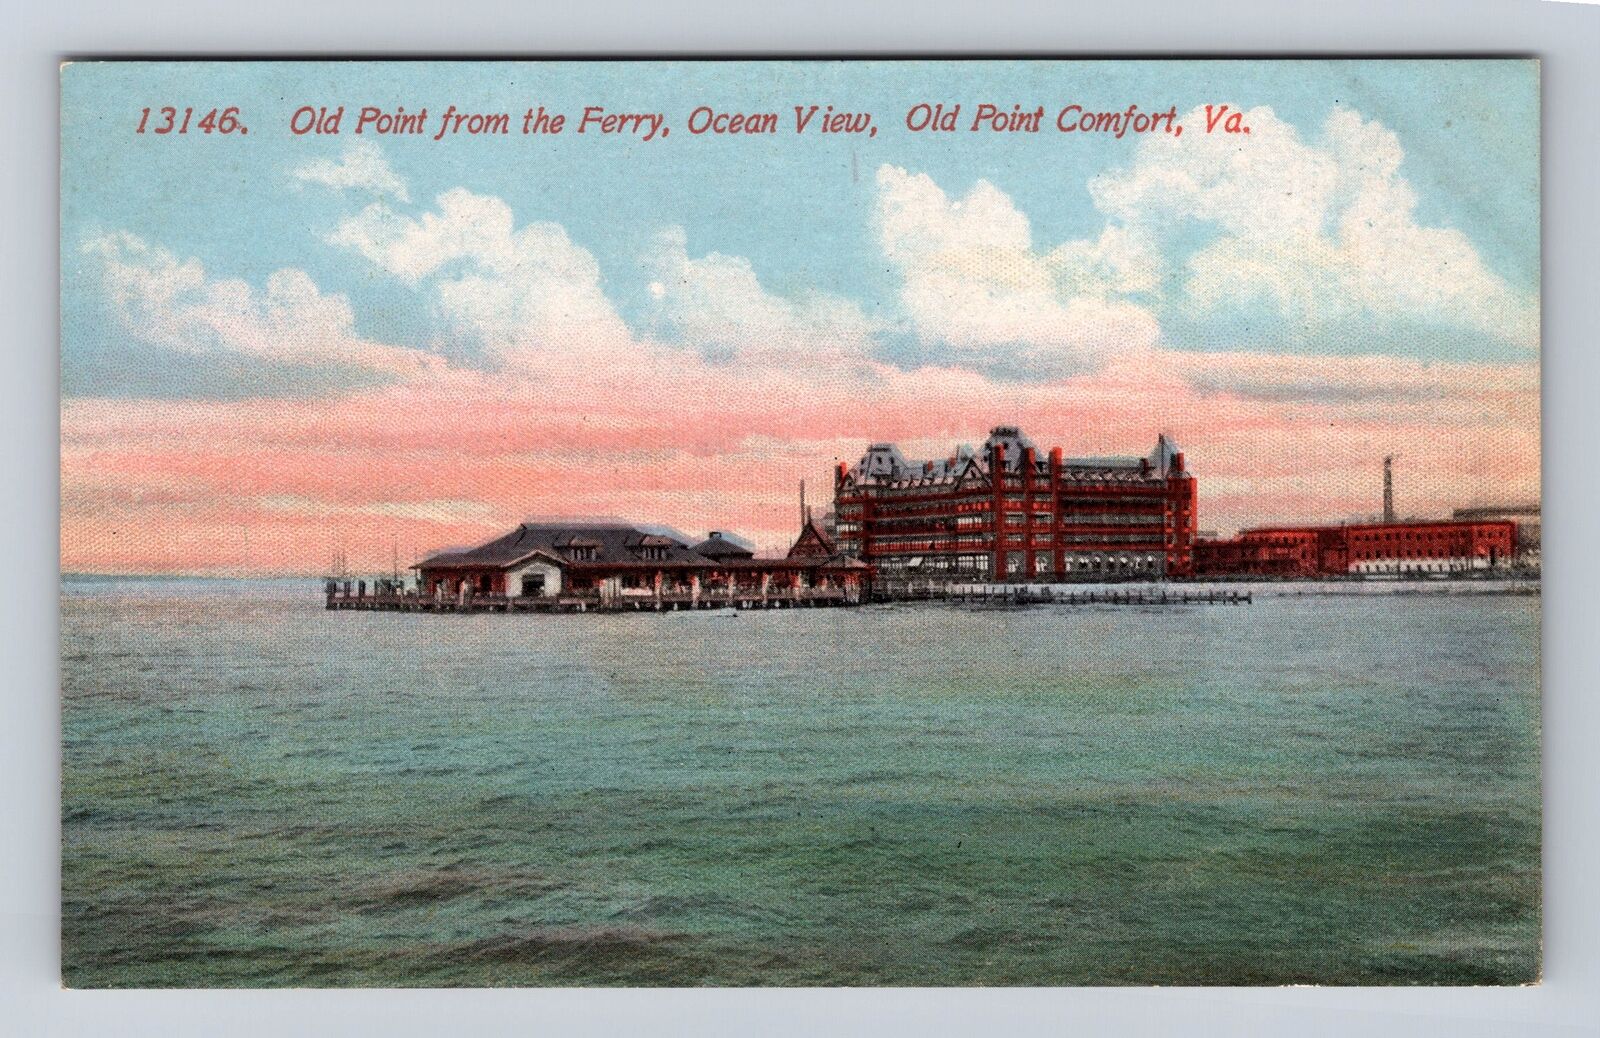 Old Point Comfort VA-Virginia, Old Point From The Ferry, Vintage Postcard